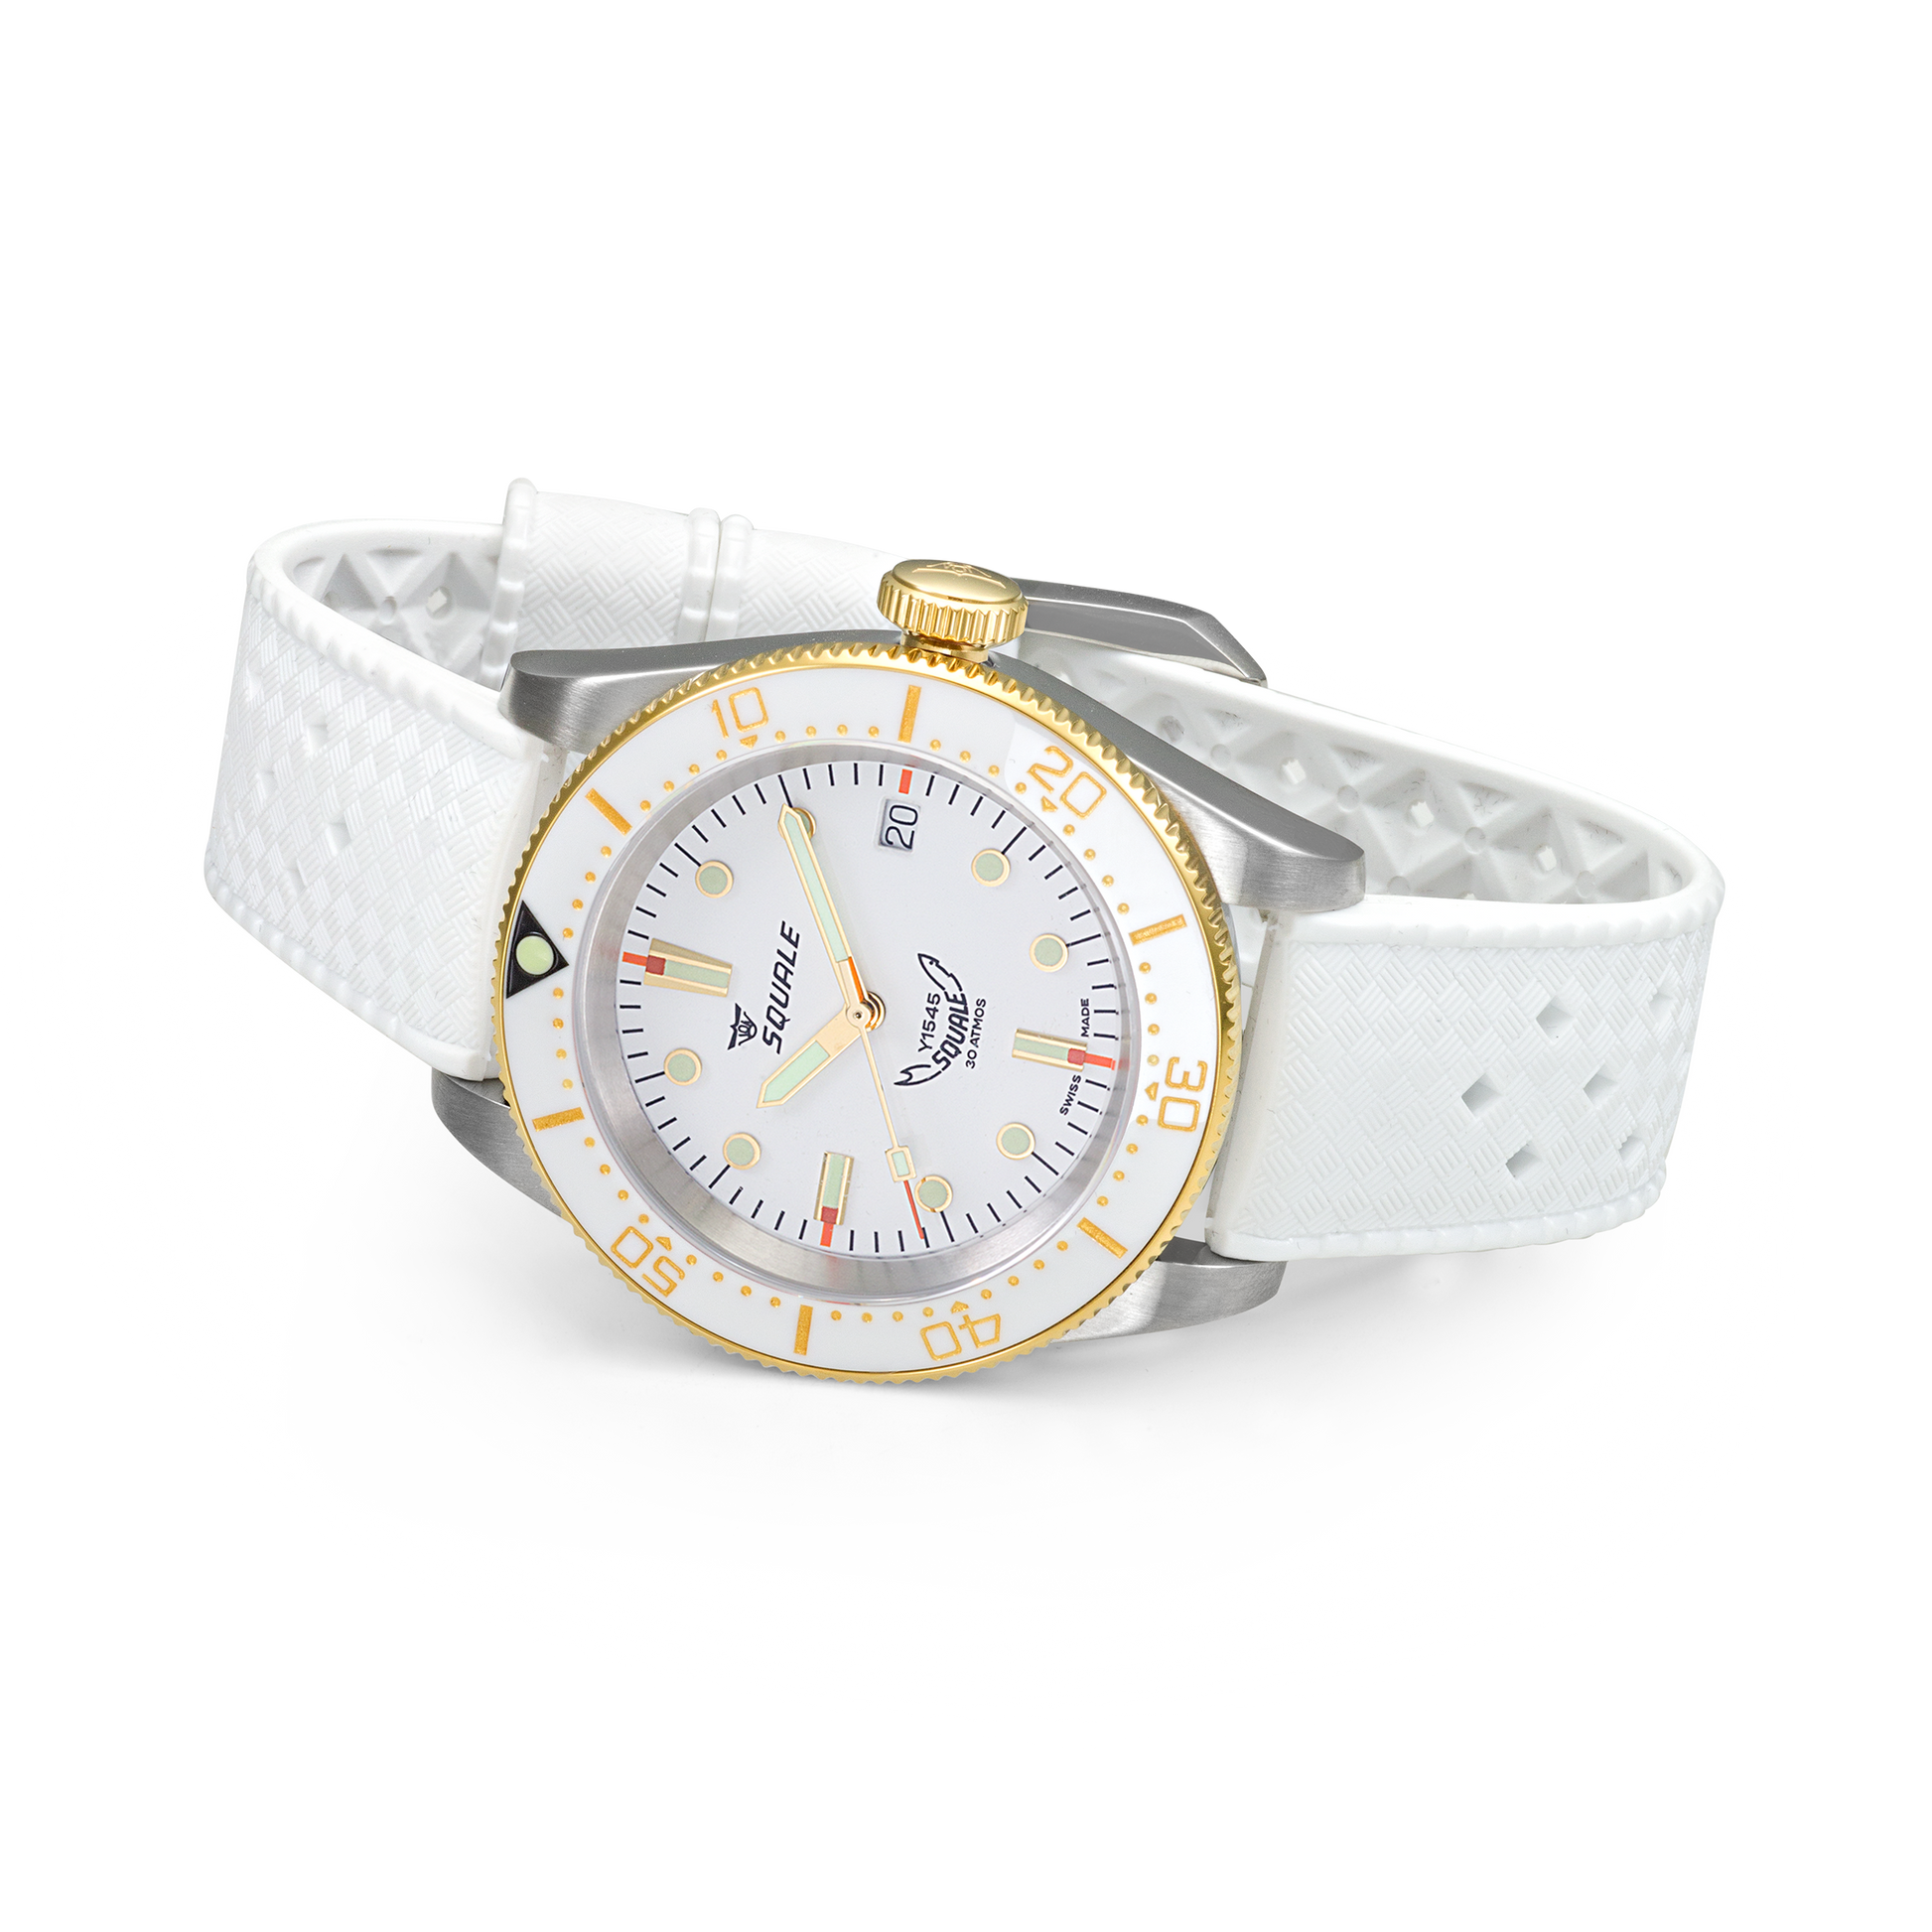 Squale 1545 30ATM Weiss Gold Bicolor / 1545WTWT.HTW Squale